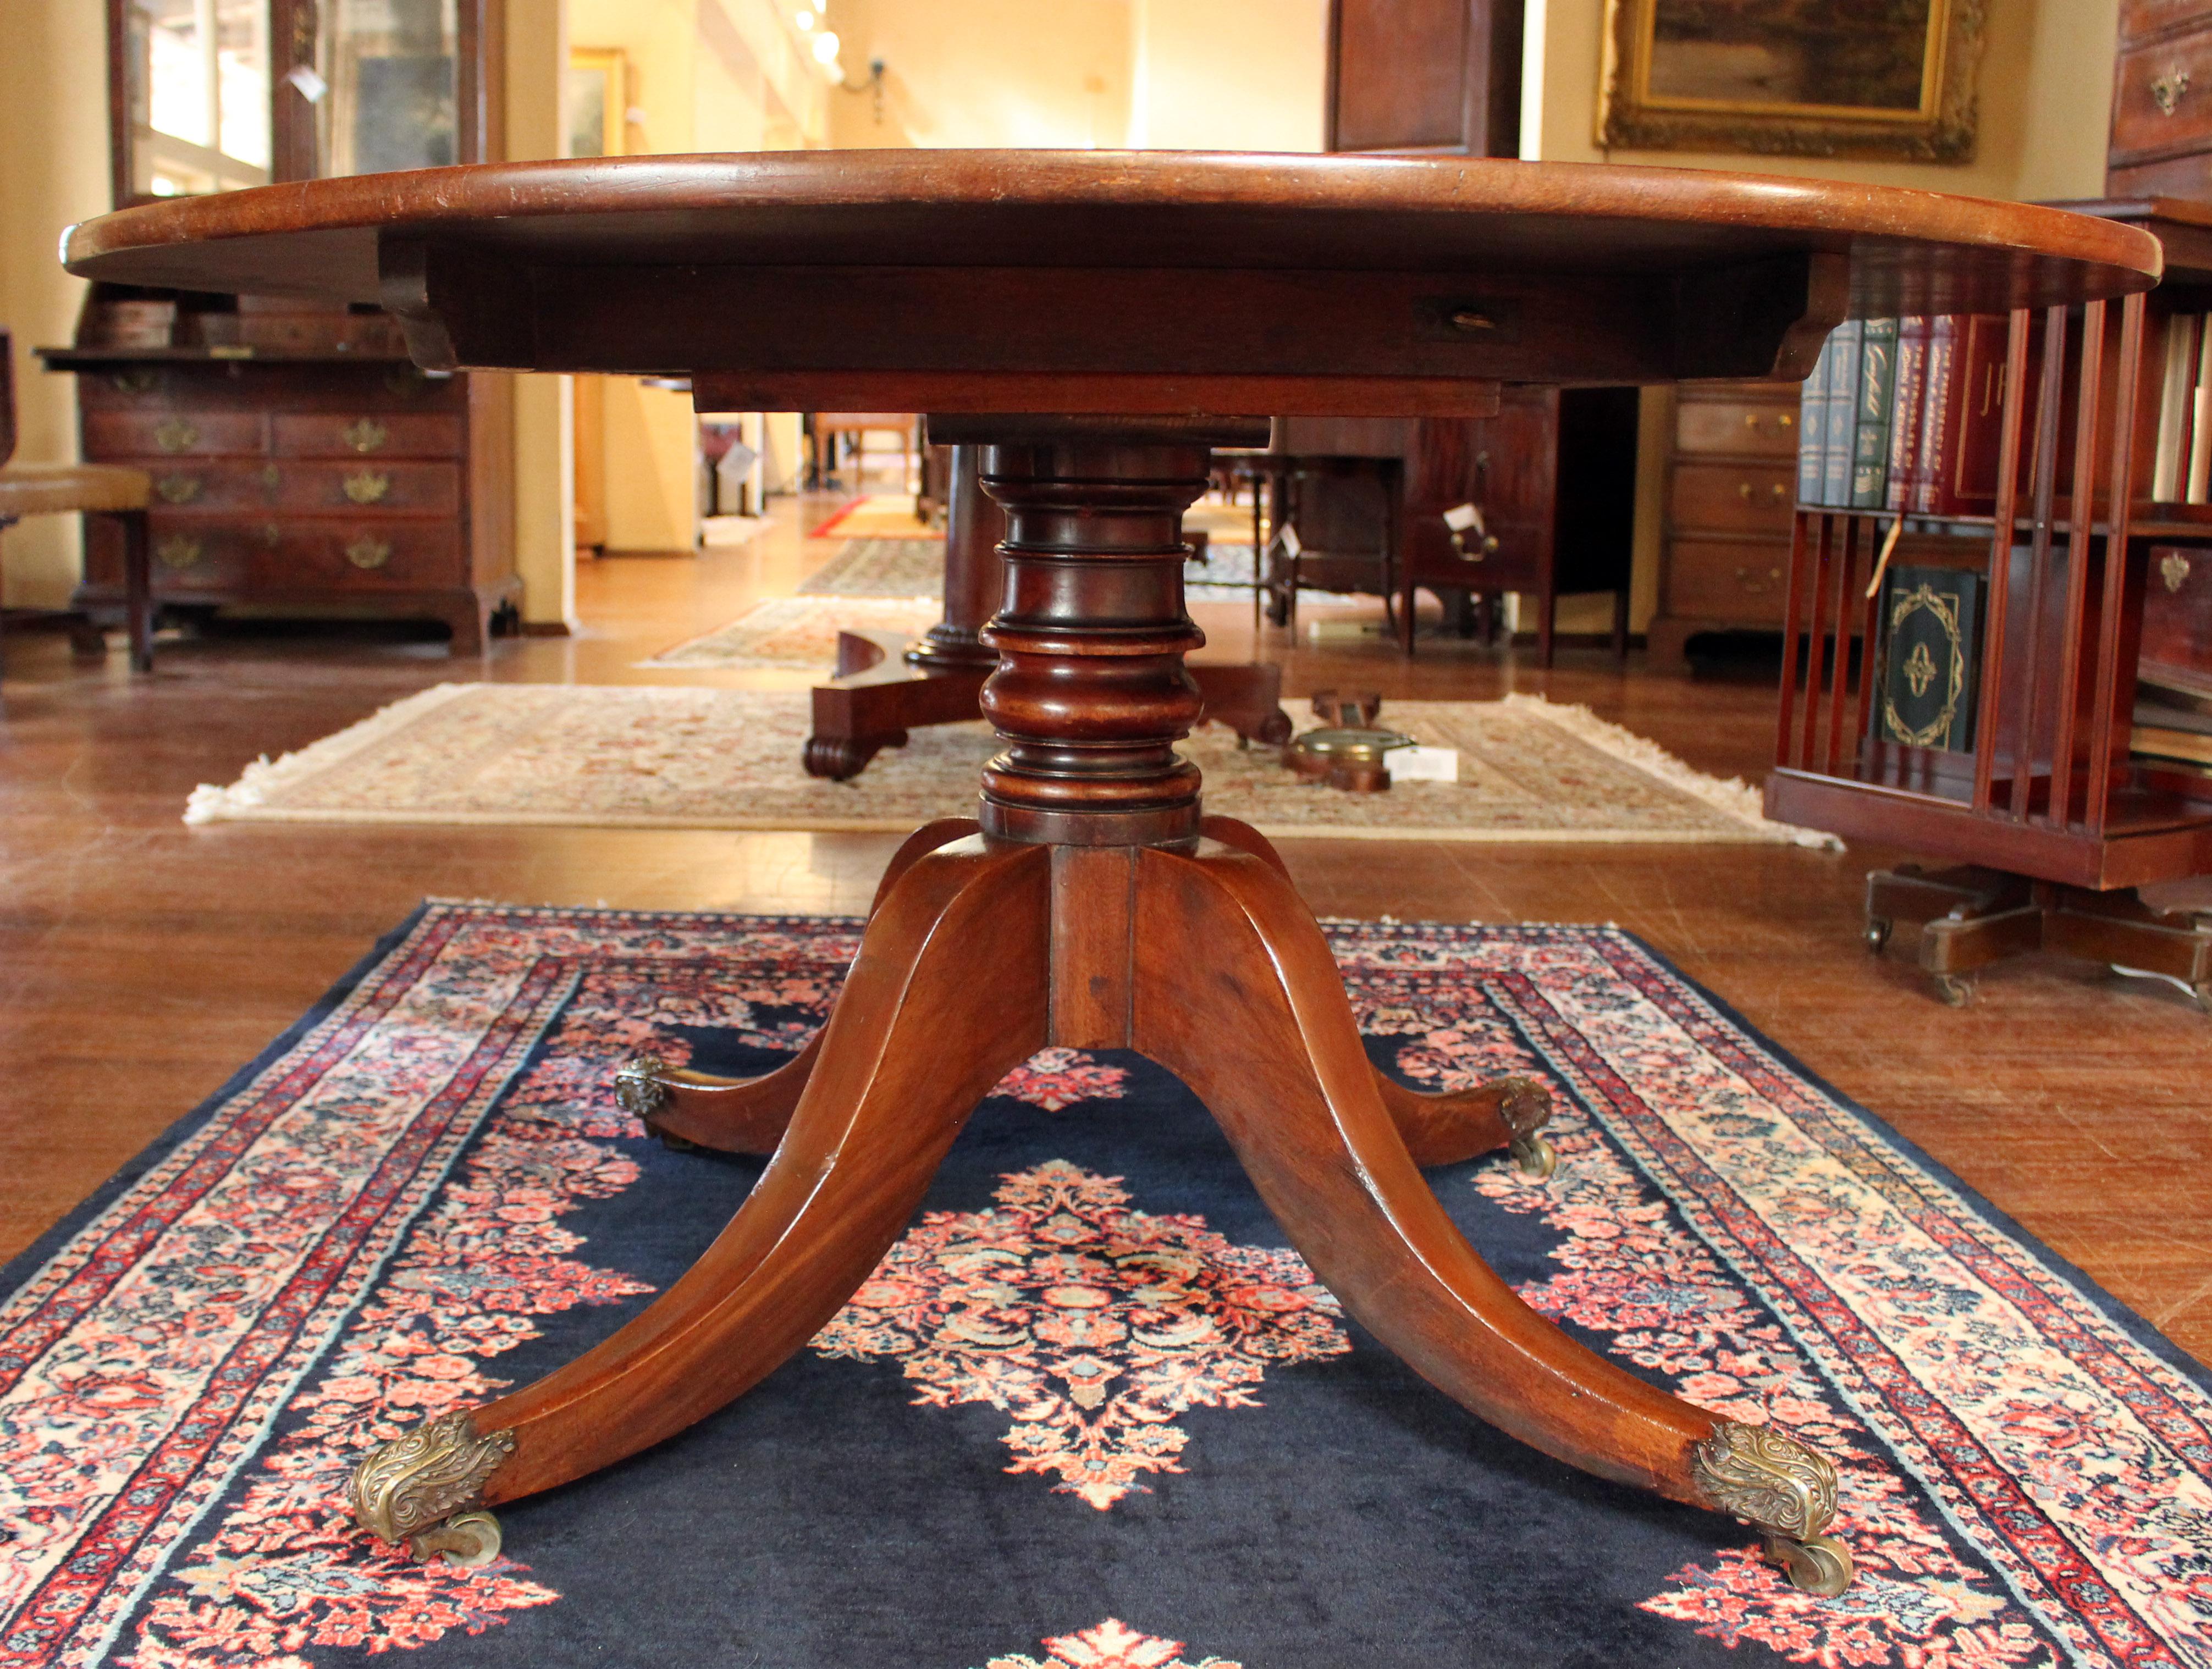 Late 18th-early 19th century Georgian round breakfast table or center table. English. High quality mahogany. Solid, well turned pedestal shaft to shaped splay quadraped leg base ending in outstanding quality heavy brass neoclassical acanthus motif